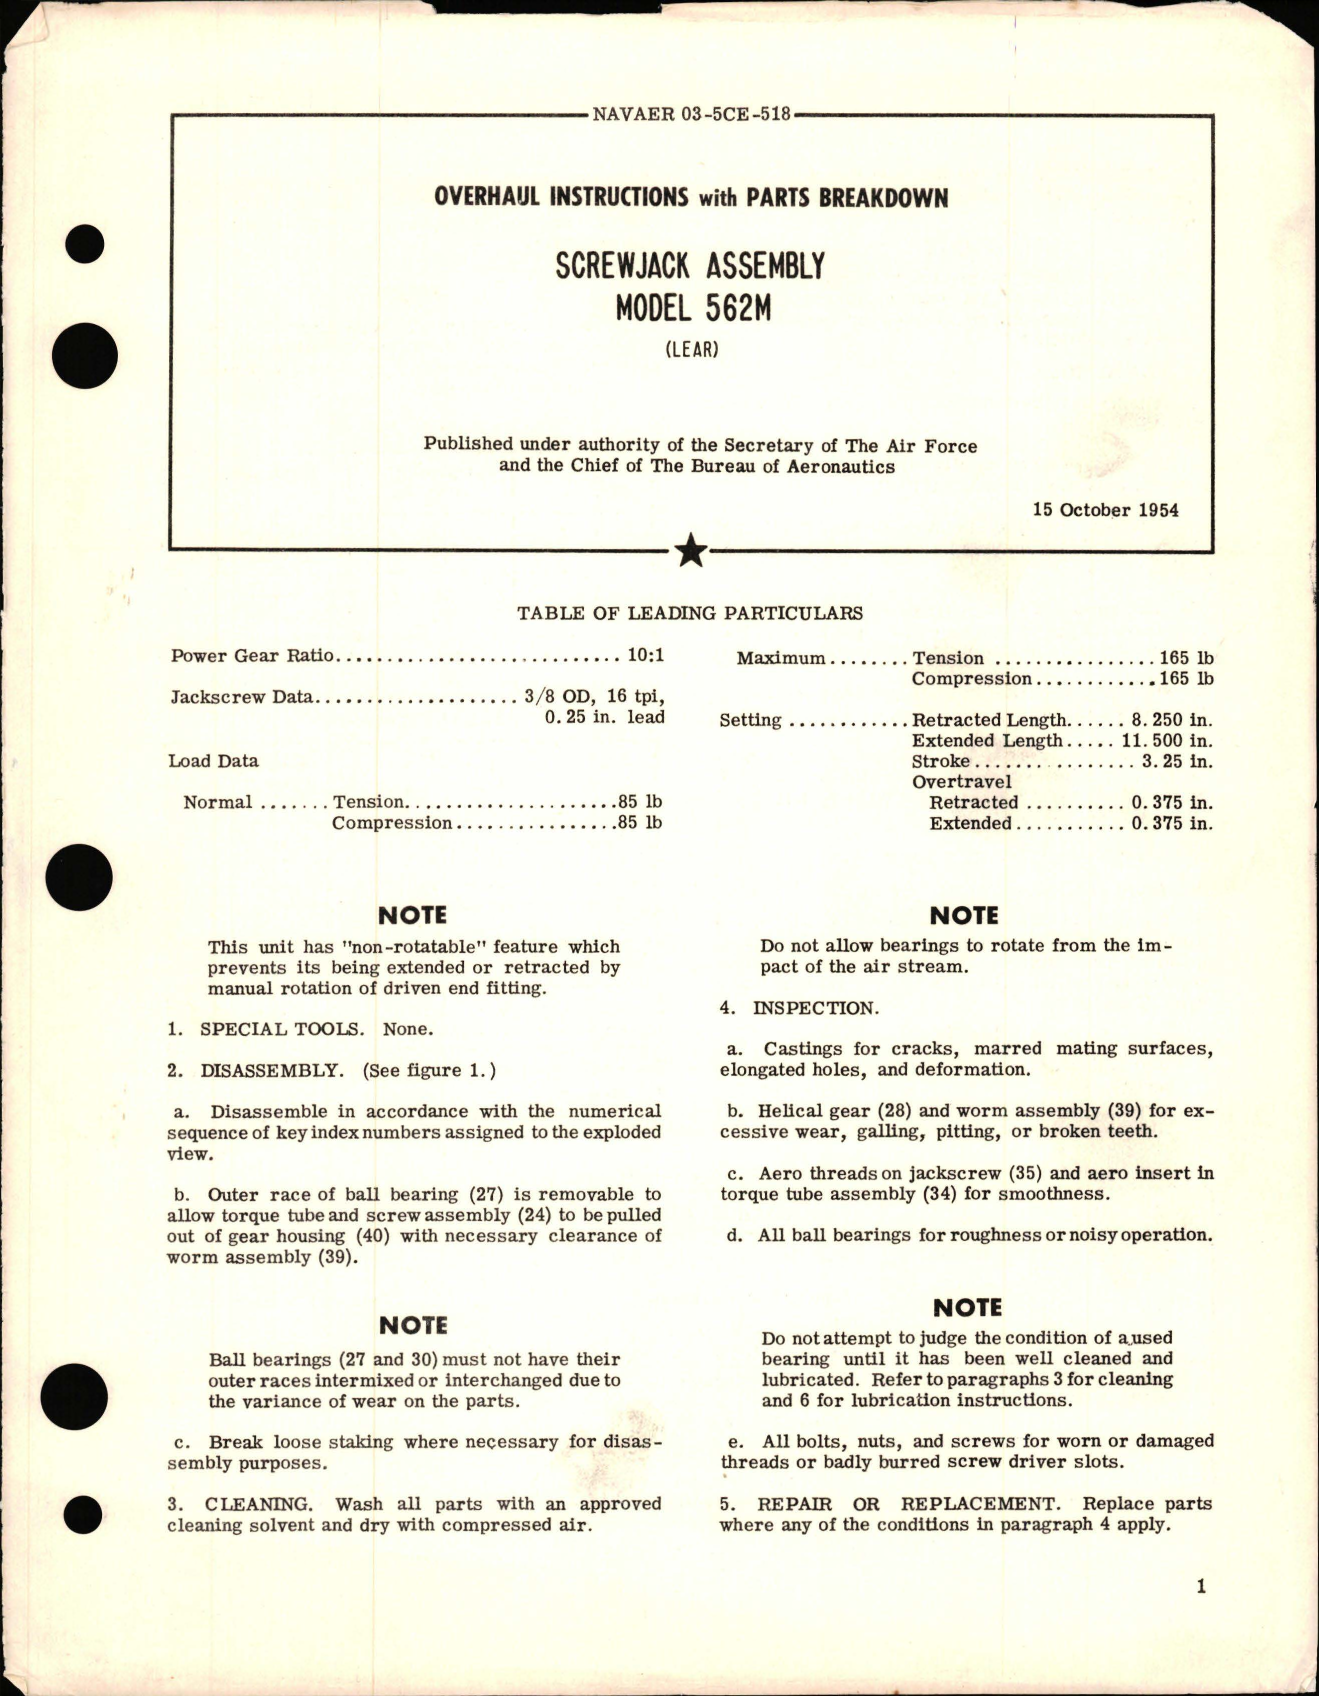 Sample page 1 from AirCorps Library document: Overhaul Instructions with Parts Breakdown for Screwjack Assembly - Model 562M 